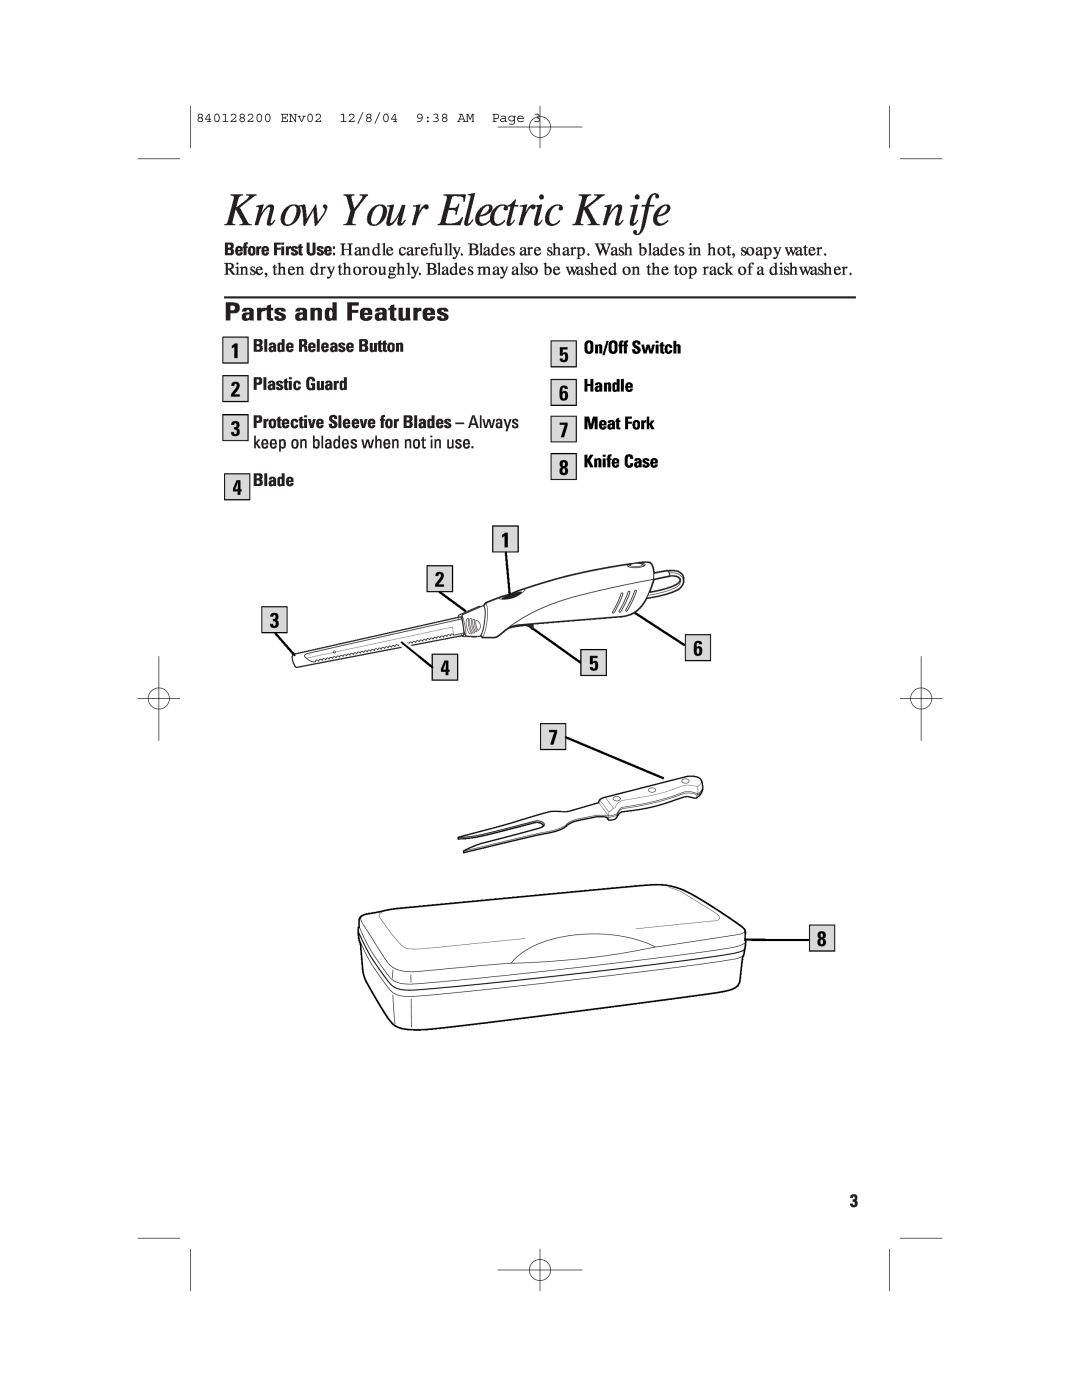 GE 840128200, 169020, 169023 manual Know Your Electric Knife, Parts and Features, Blade Release Button 2 Plastic Guard 